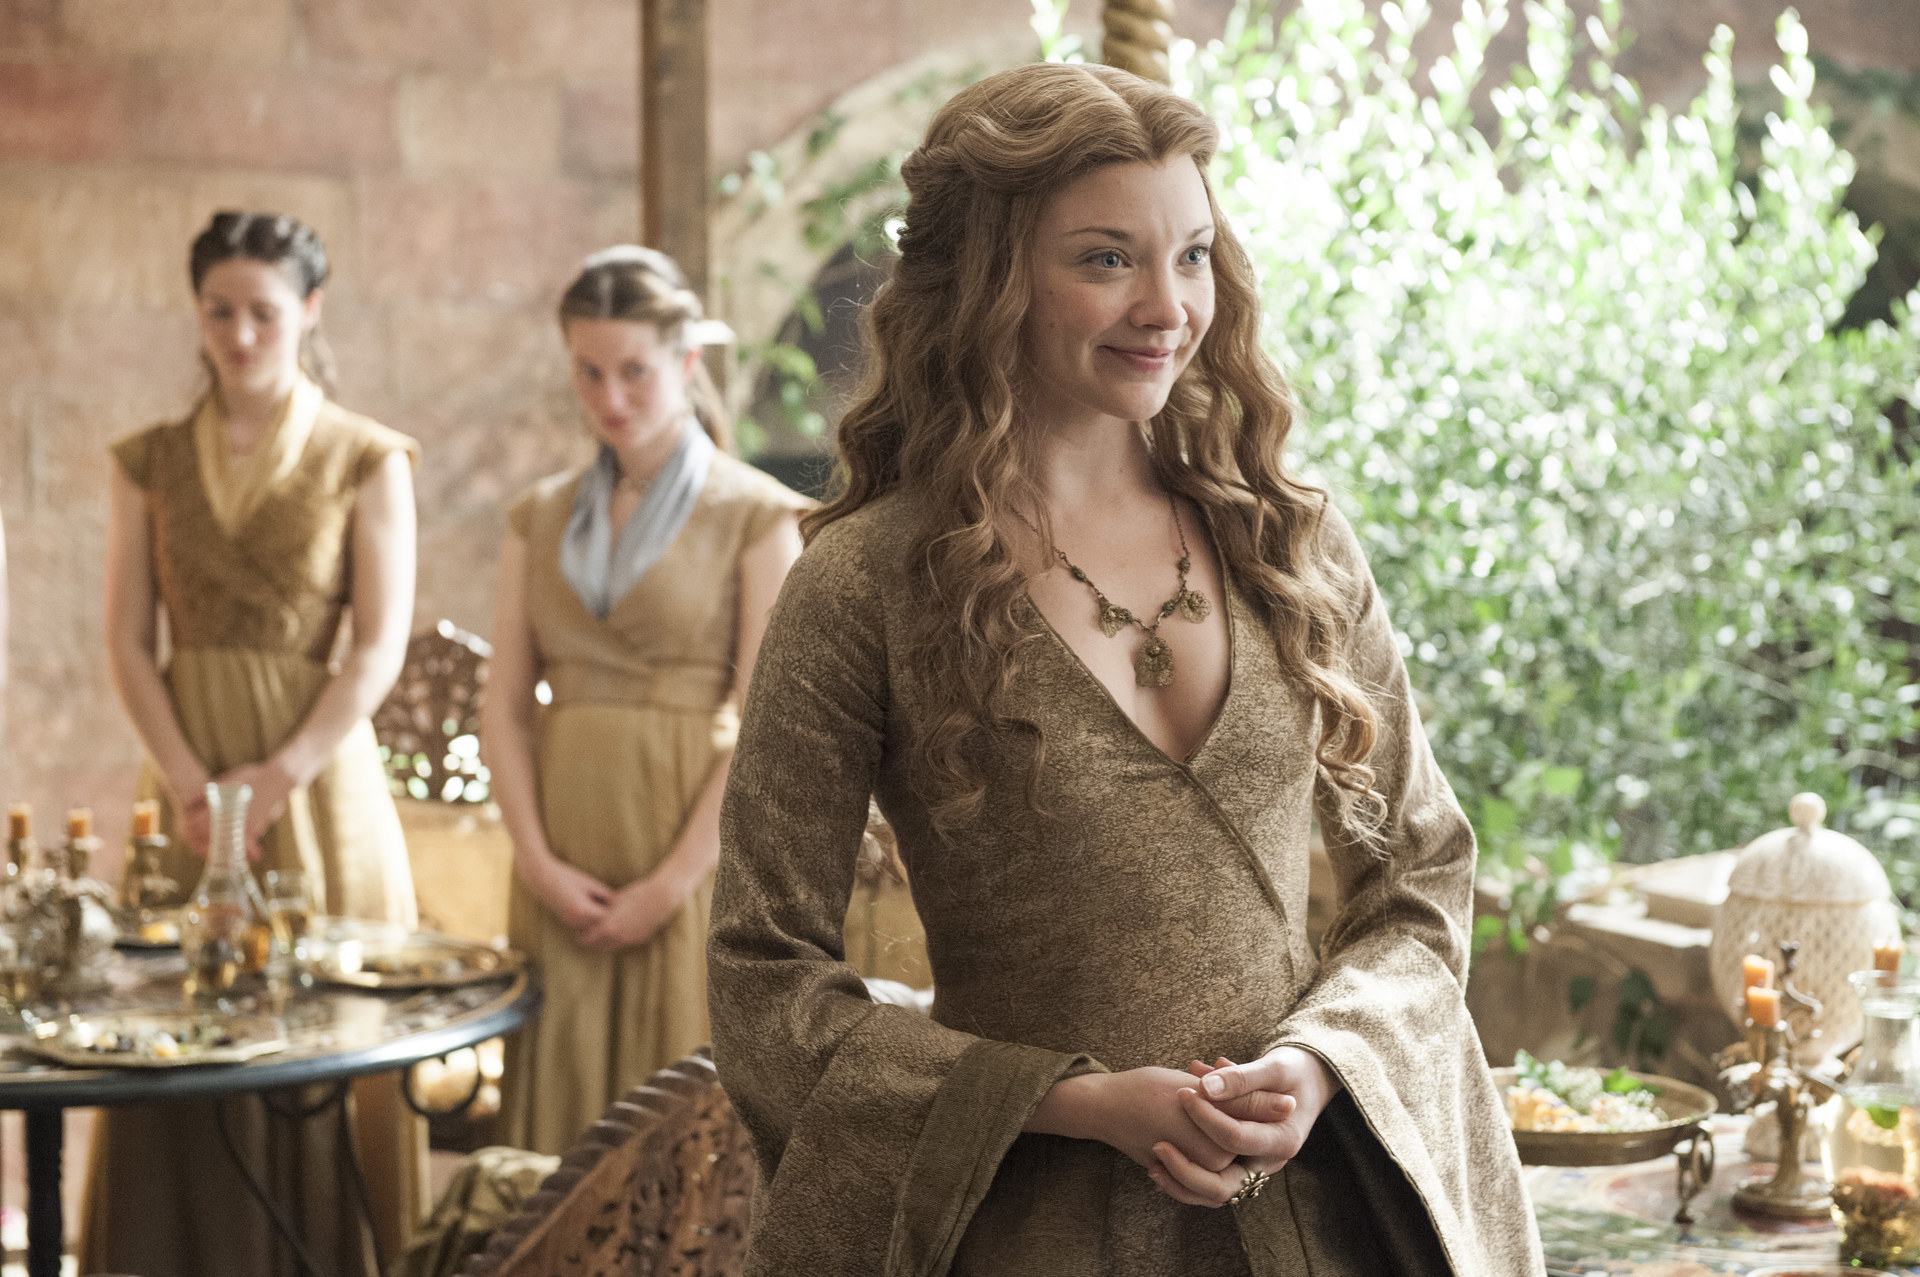 Natalie Dormer as Margaery Tyrell in &quot;Game of Thrones&quot;